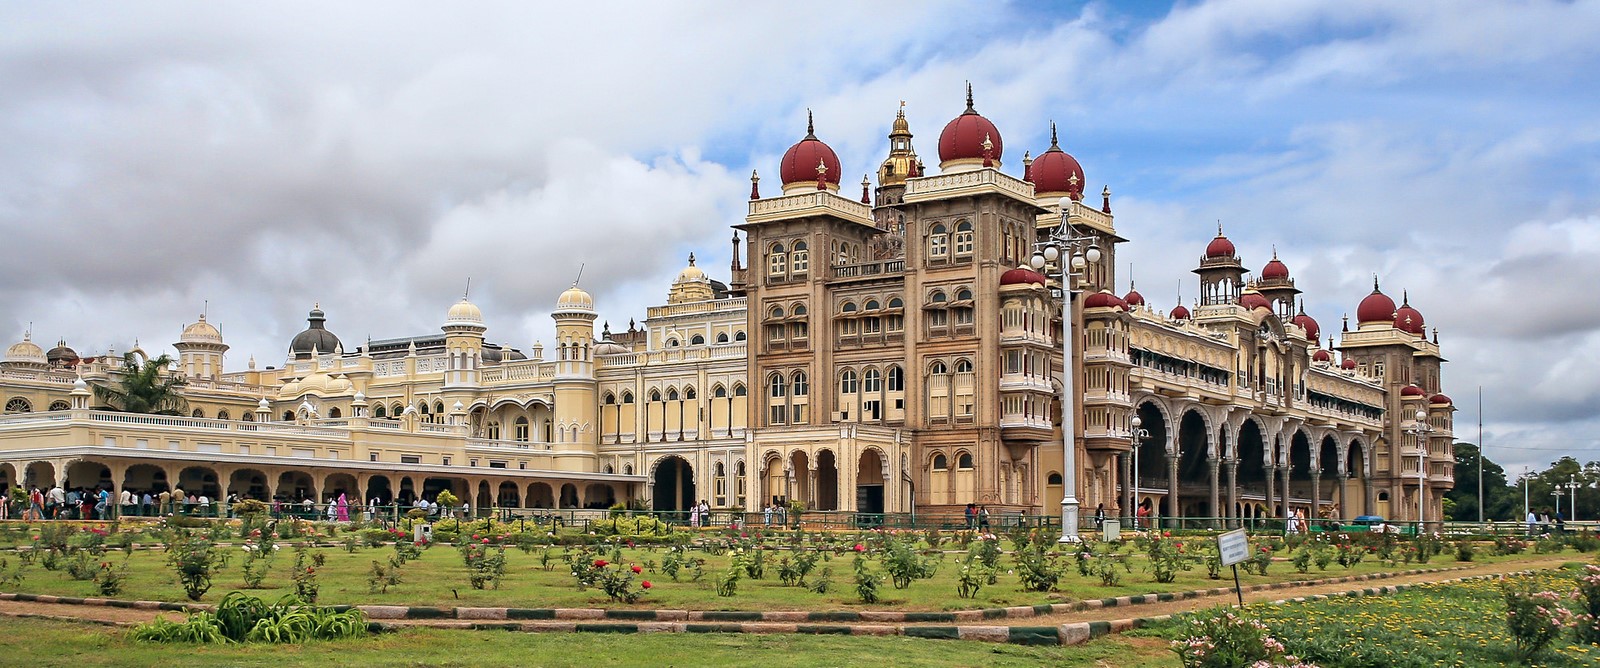 15 Places To Visit In Karnataka for Travelling Architect - Sheet1